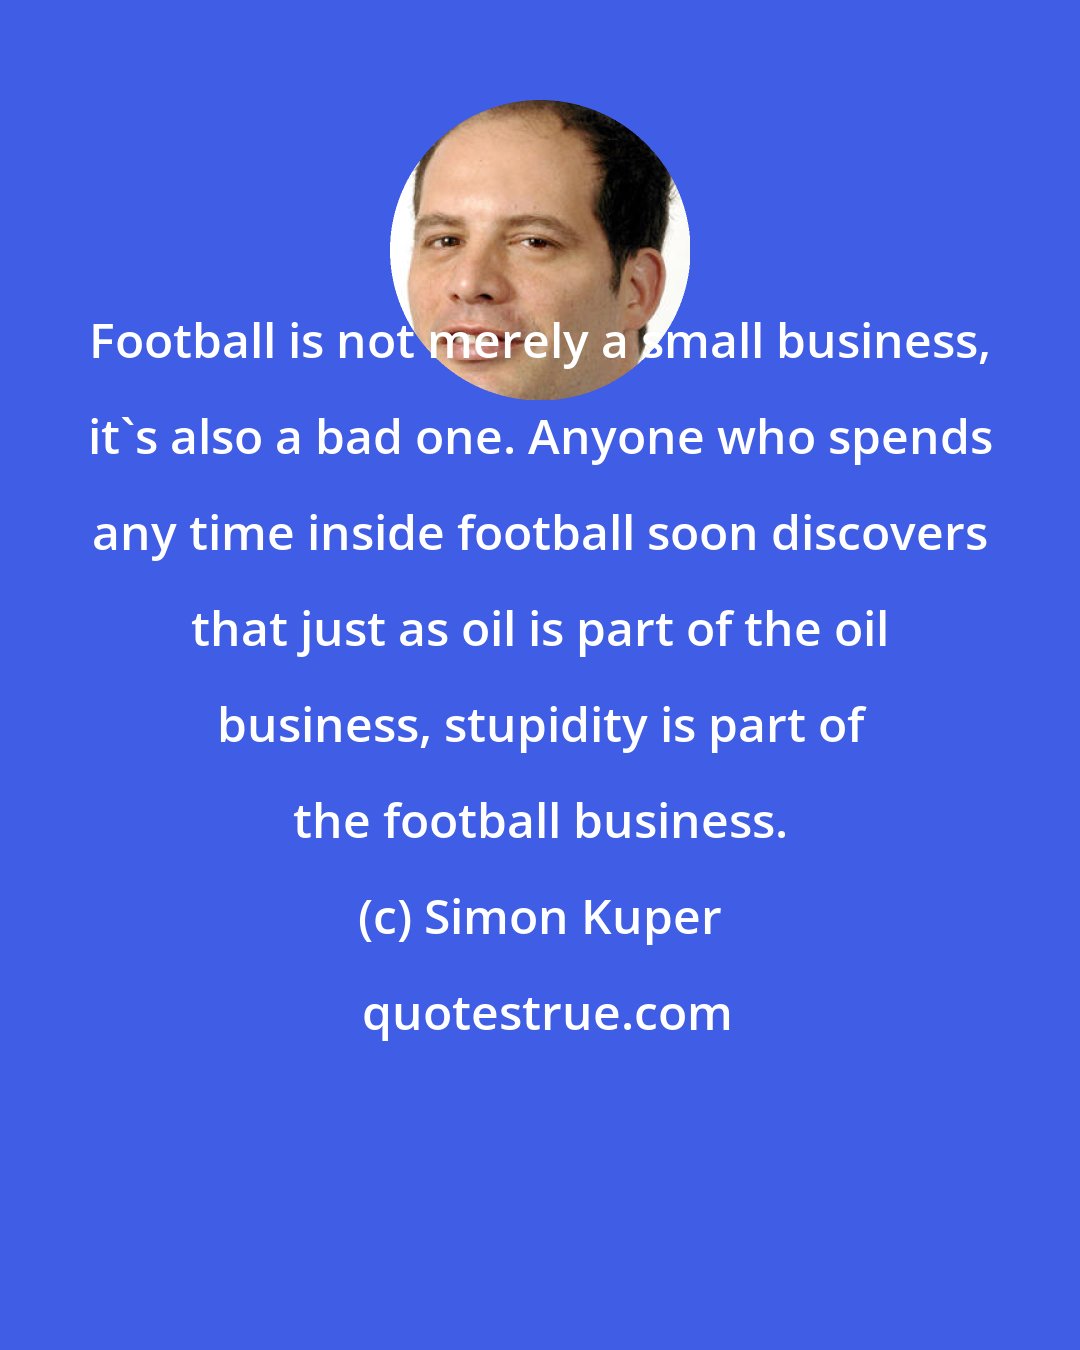 Simon Kuper: Football is not merely a small business, it's also a bad one. Anyone who spends any time inside football soon discovers that just as oil is part of the oil business, stupidity is part of the football business.